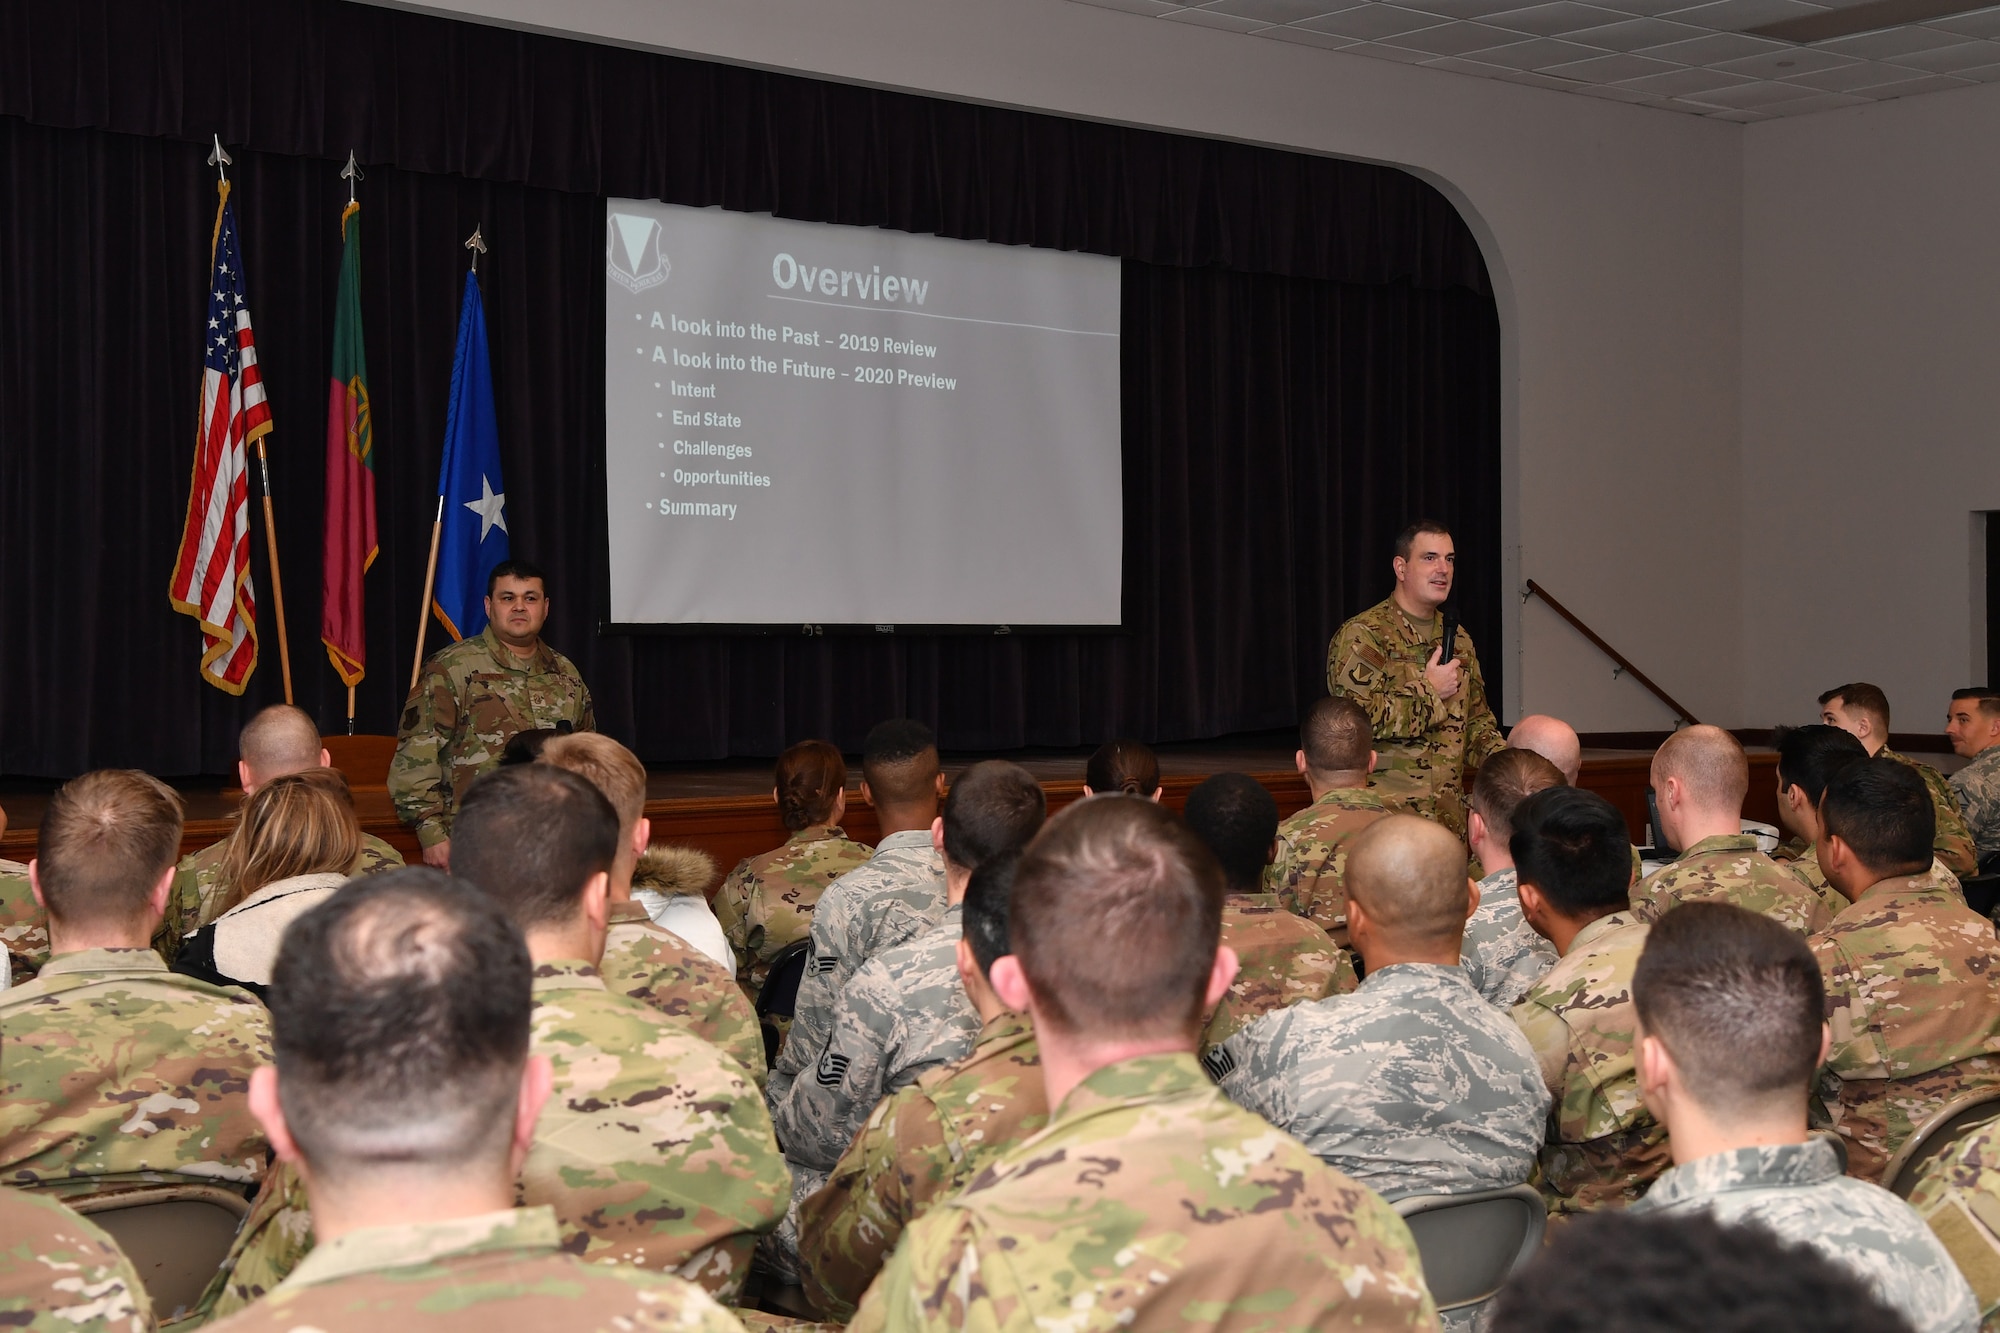 U.S. Air Force Brig. Gen. Mark R. August, 86th Airlift Wing commander, right, and U.S. Air Force Chief Master Sgt. Ernesto J. Rendon, 86th AW command chief, speak to Airmen from the 65th Air Base Group at Lajes Field, Portugal, Jan. 21, 2020.